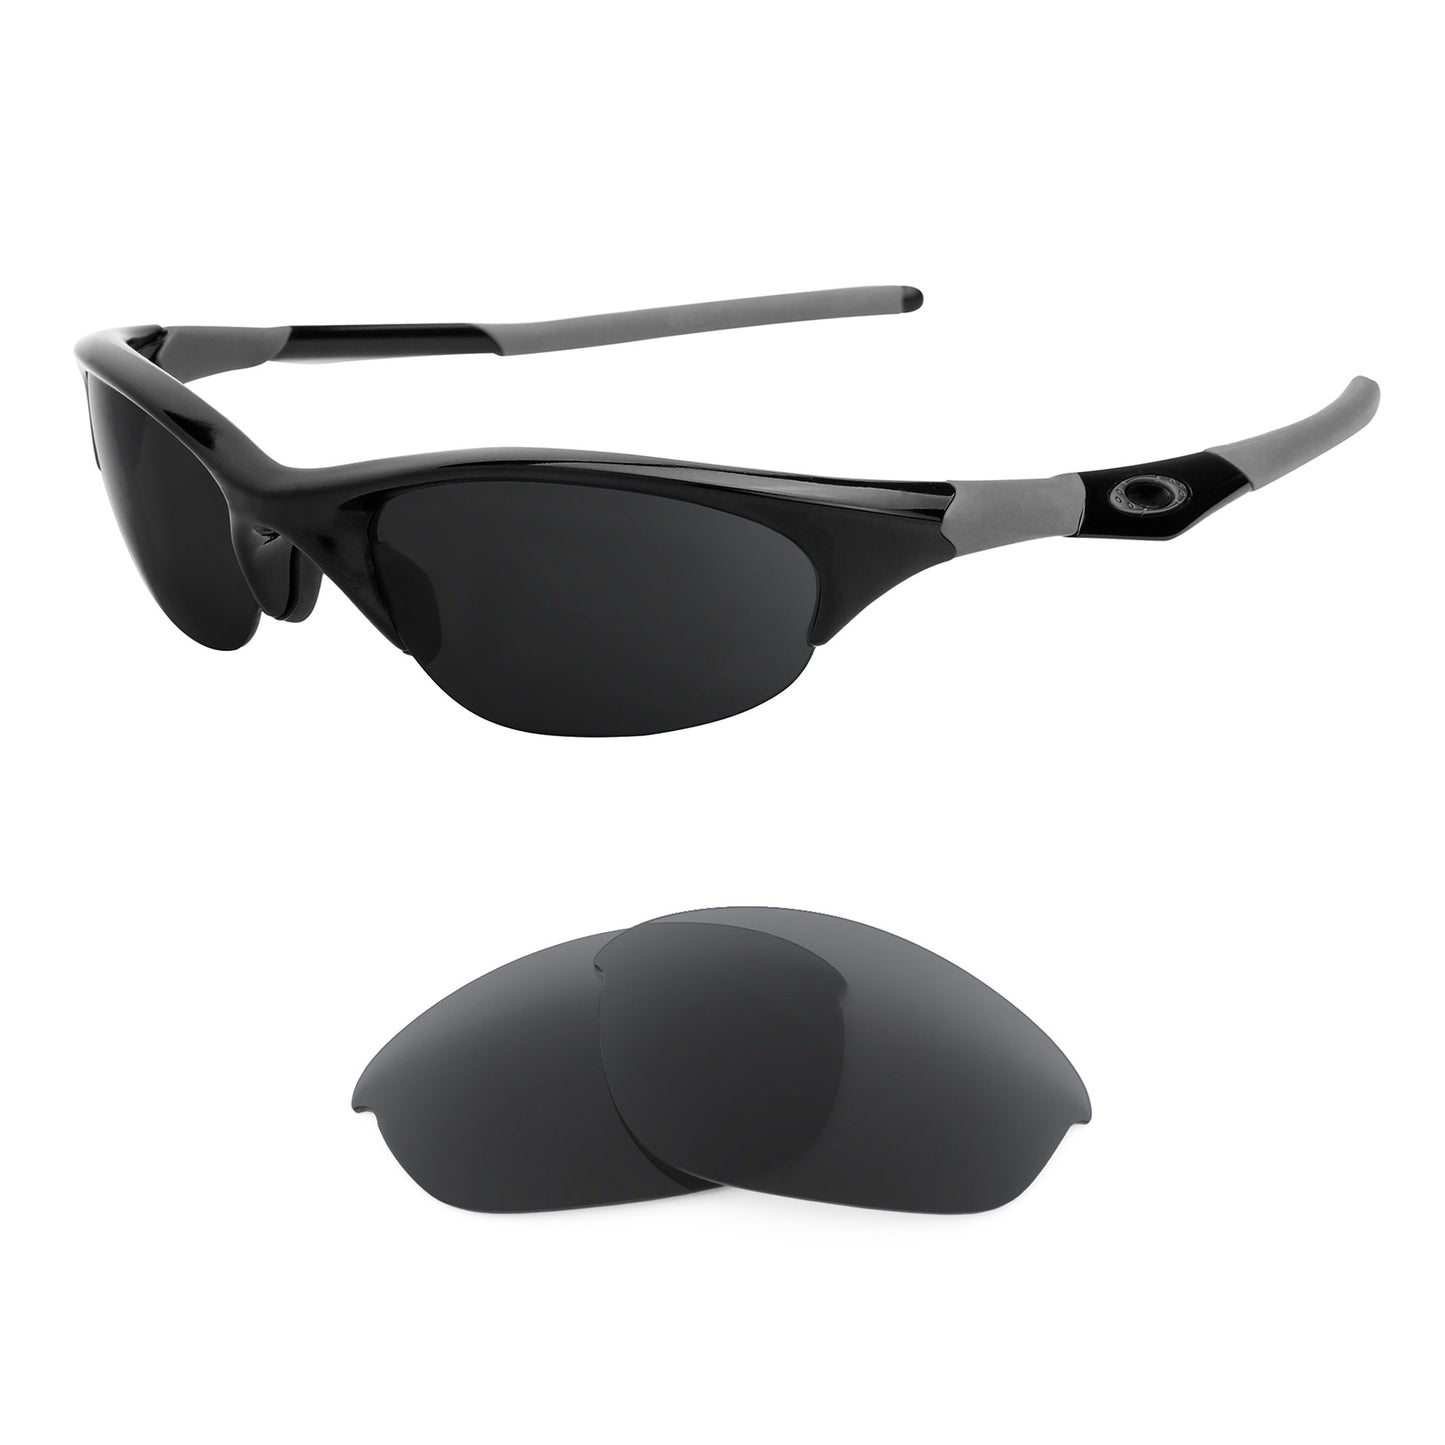 Oakley Half Jacket sunglasses with replacement lenses